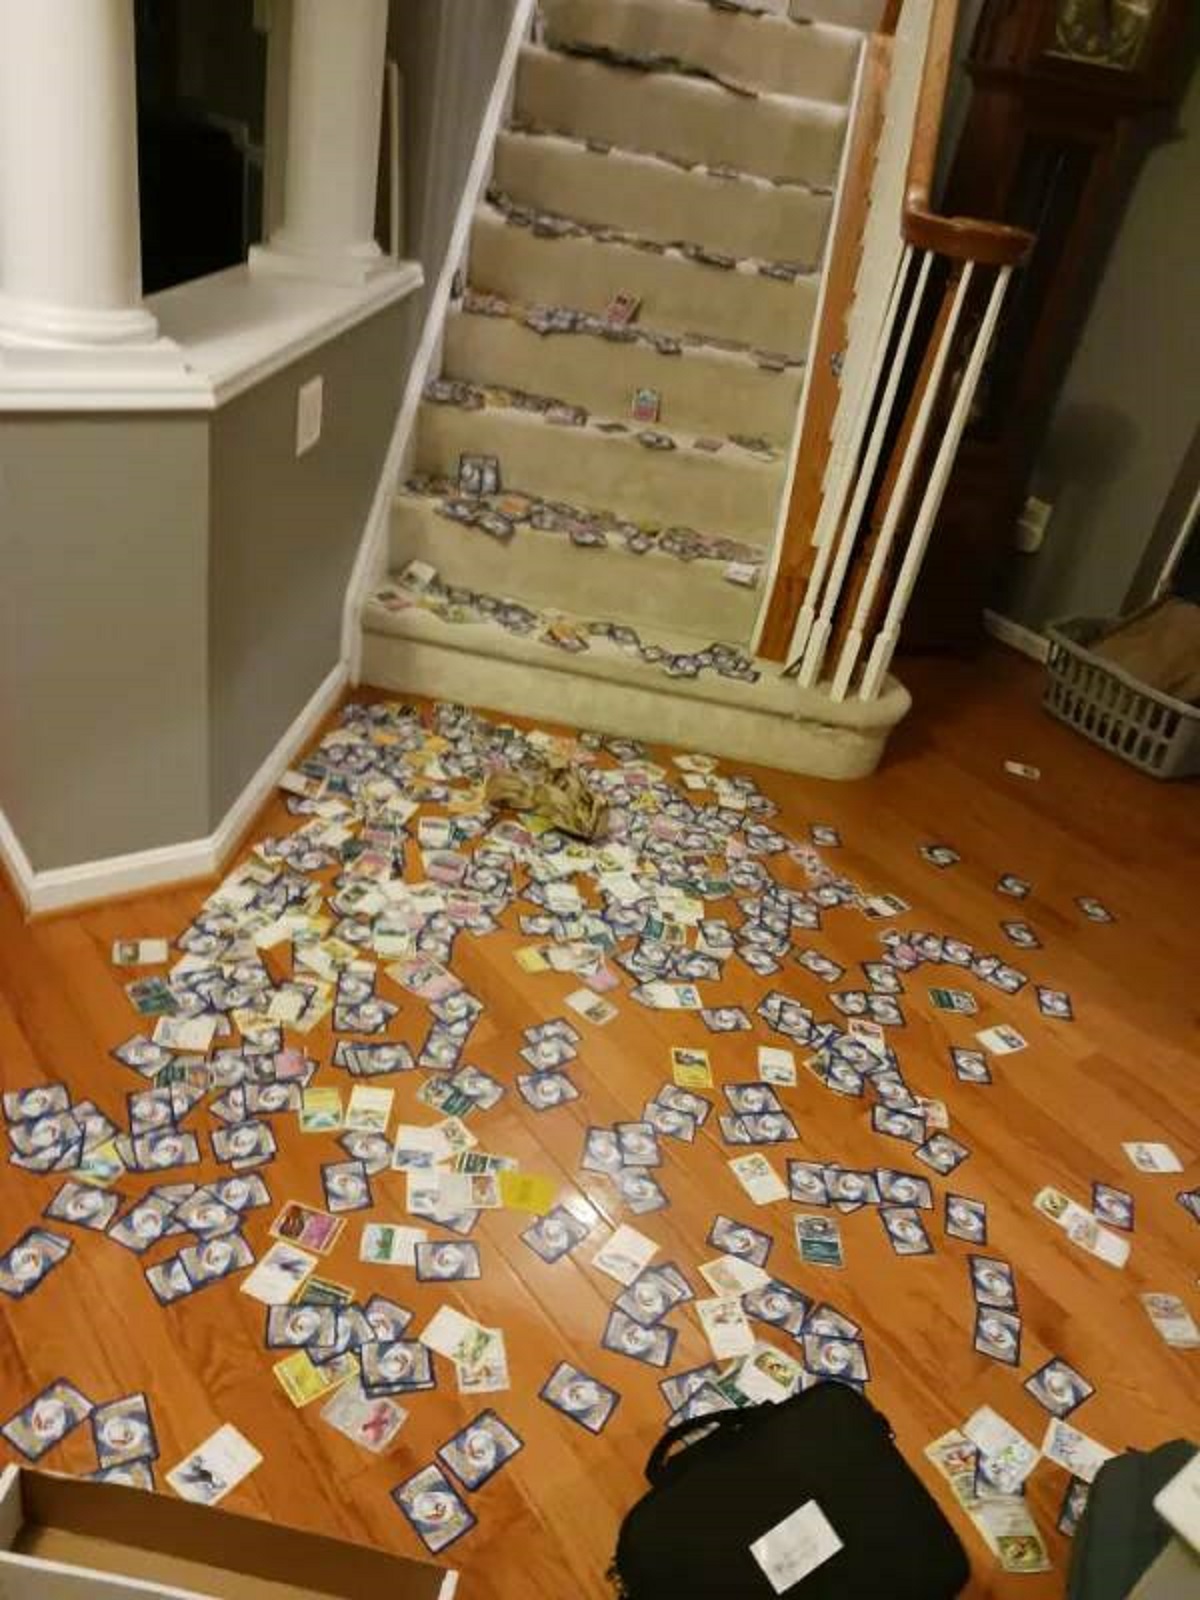 “My younger brother accidentally dropped a giant box of sorted pokemon cards down the stairs.”